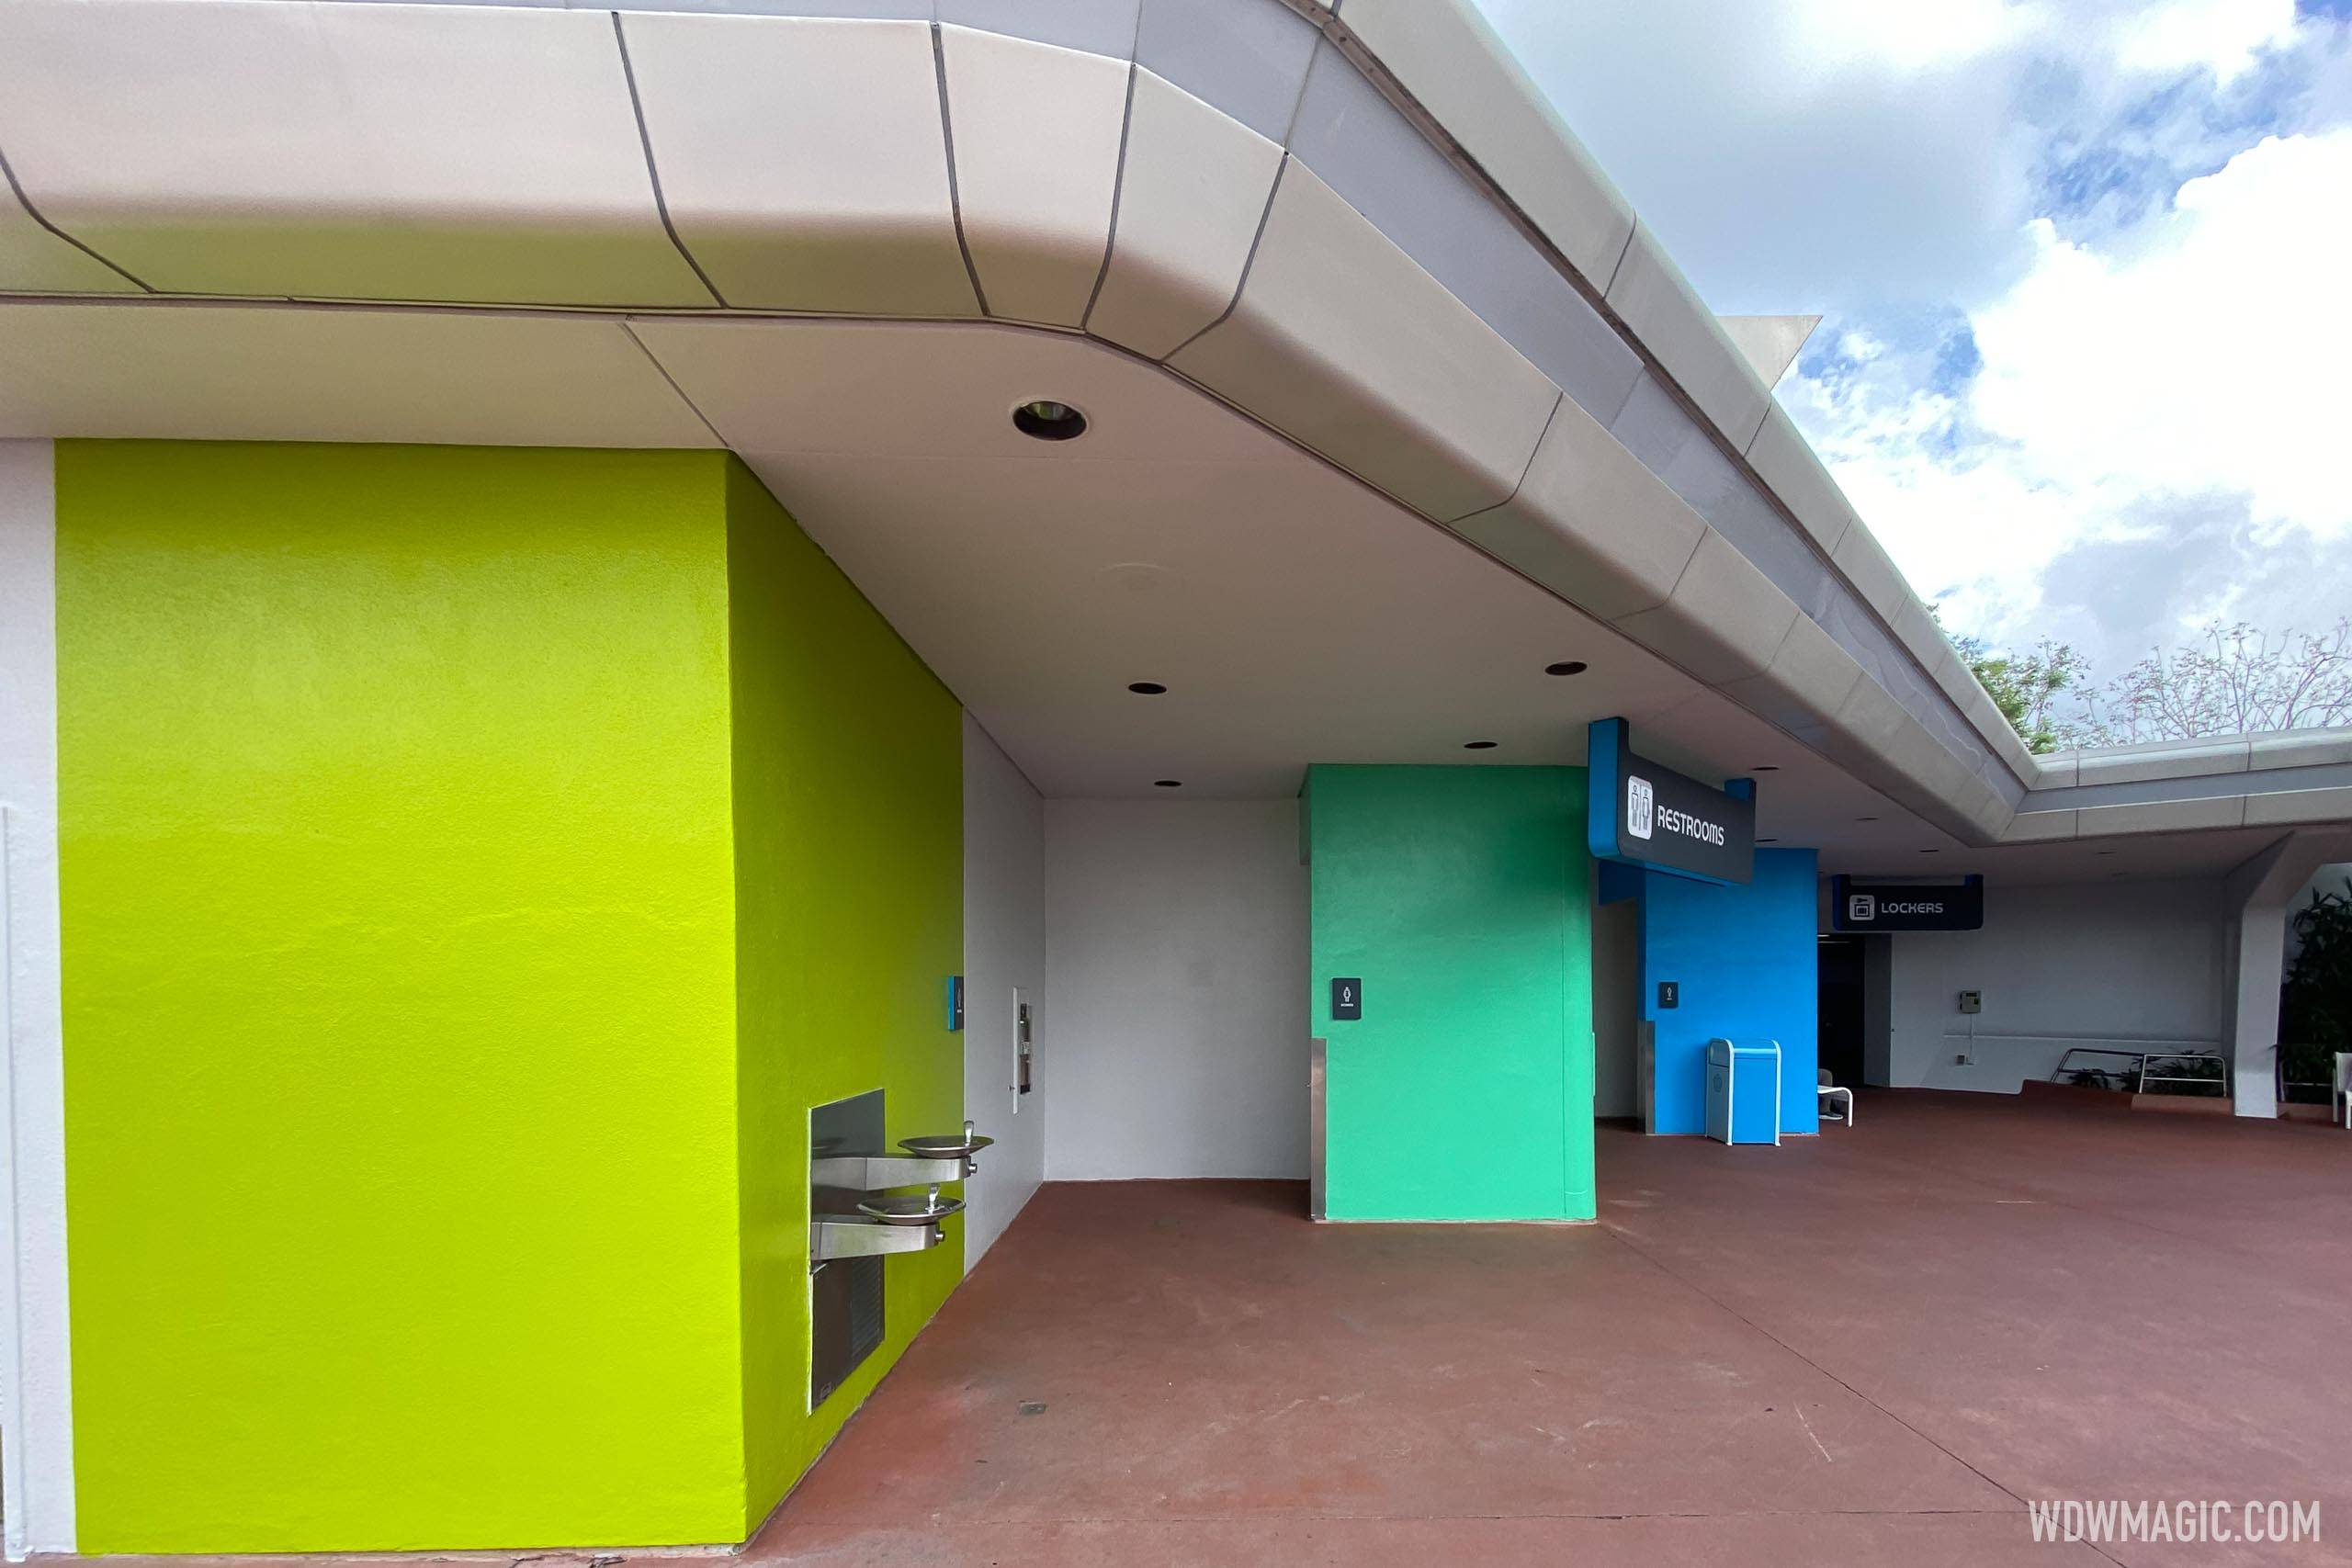 New EPCOT color palette comes to the entrance of the Spaceship Earth restrooms